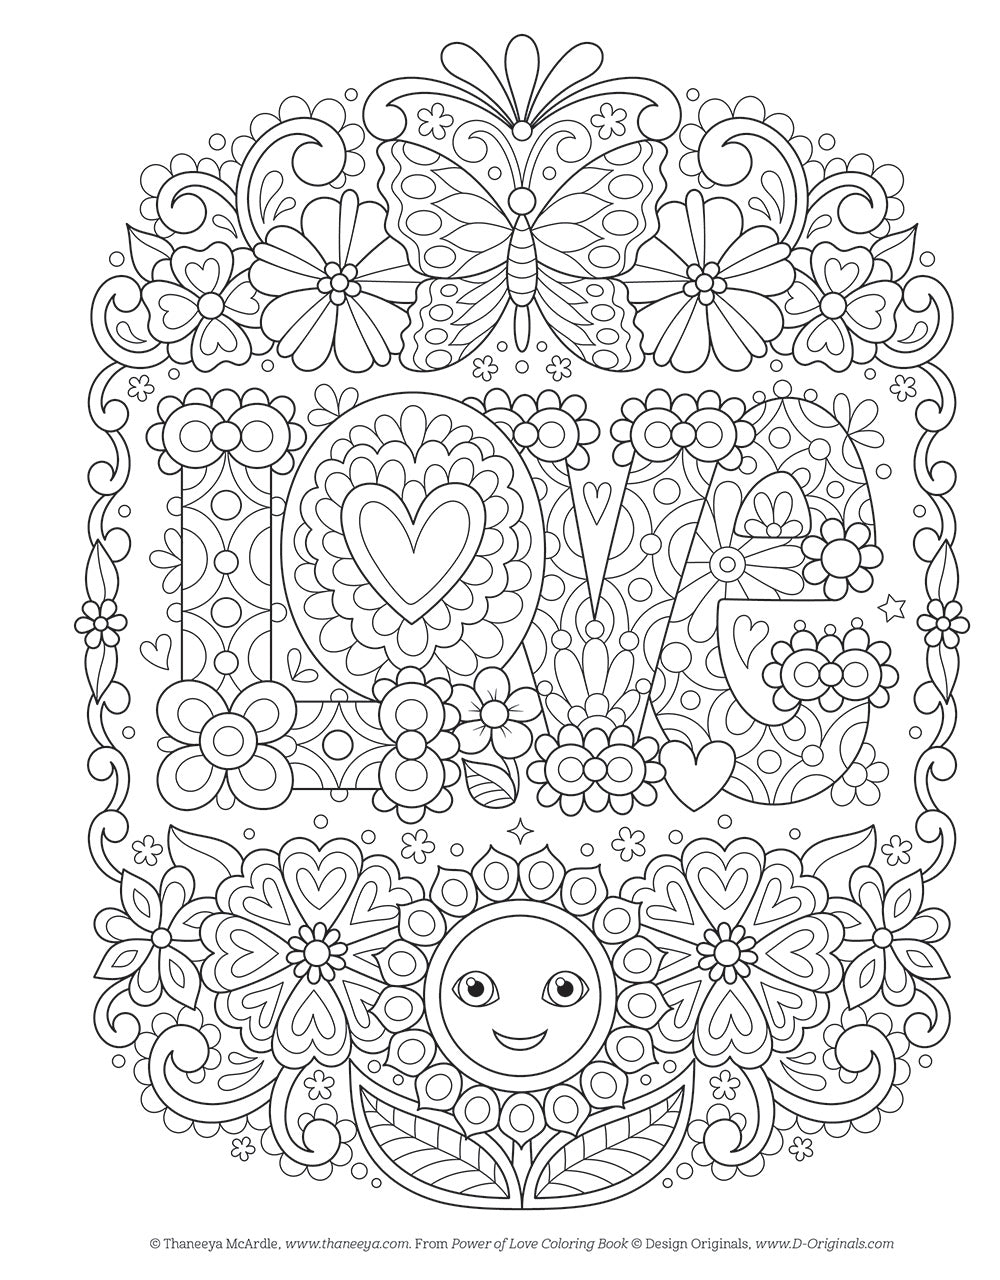 Power of Love Coloring Book